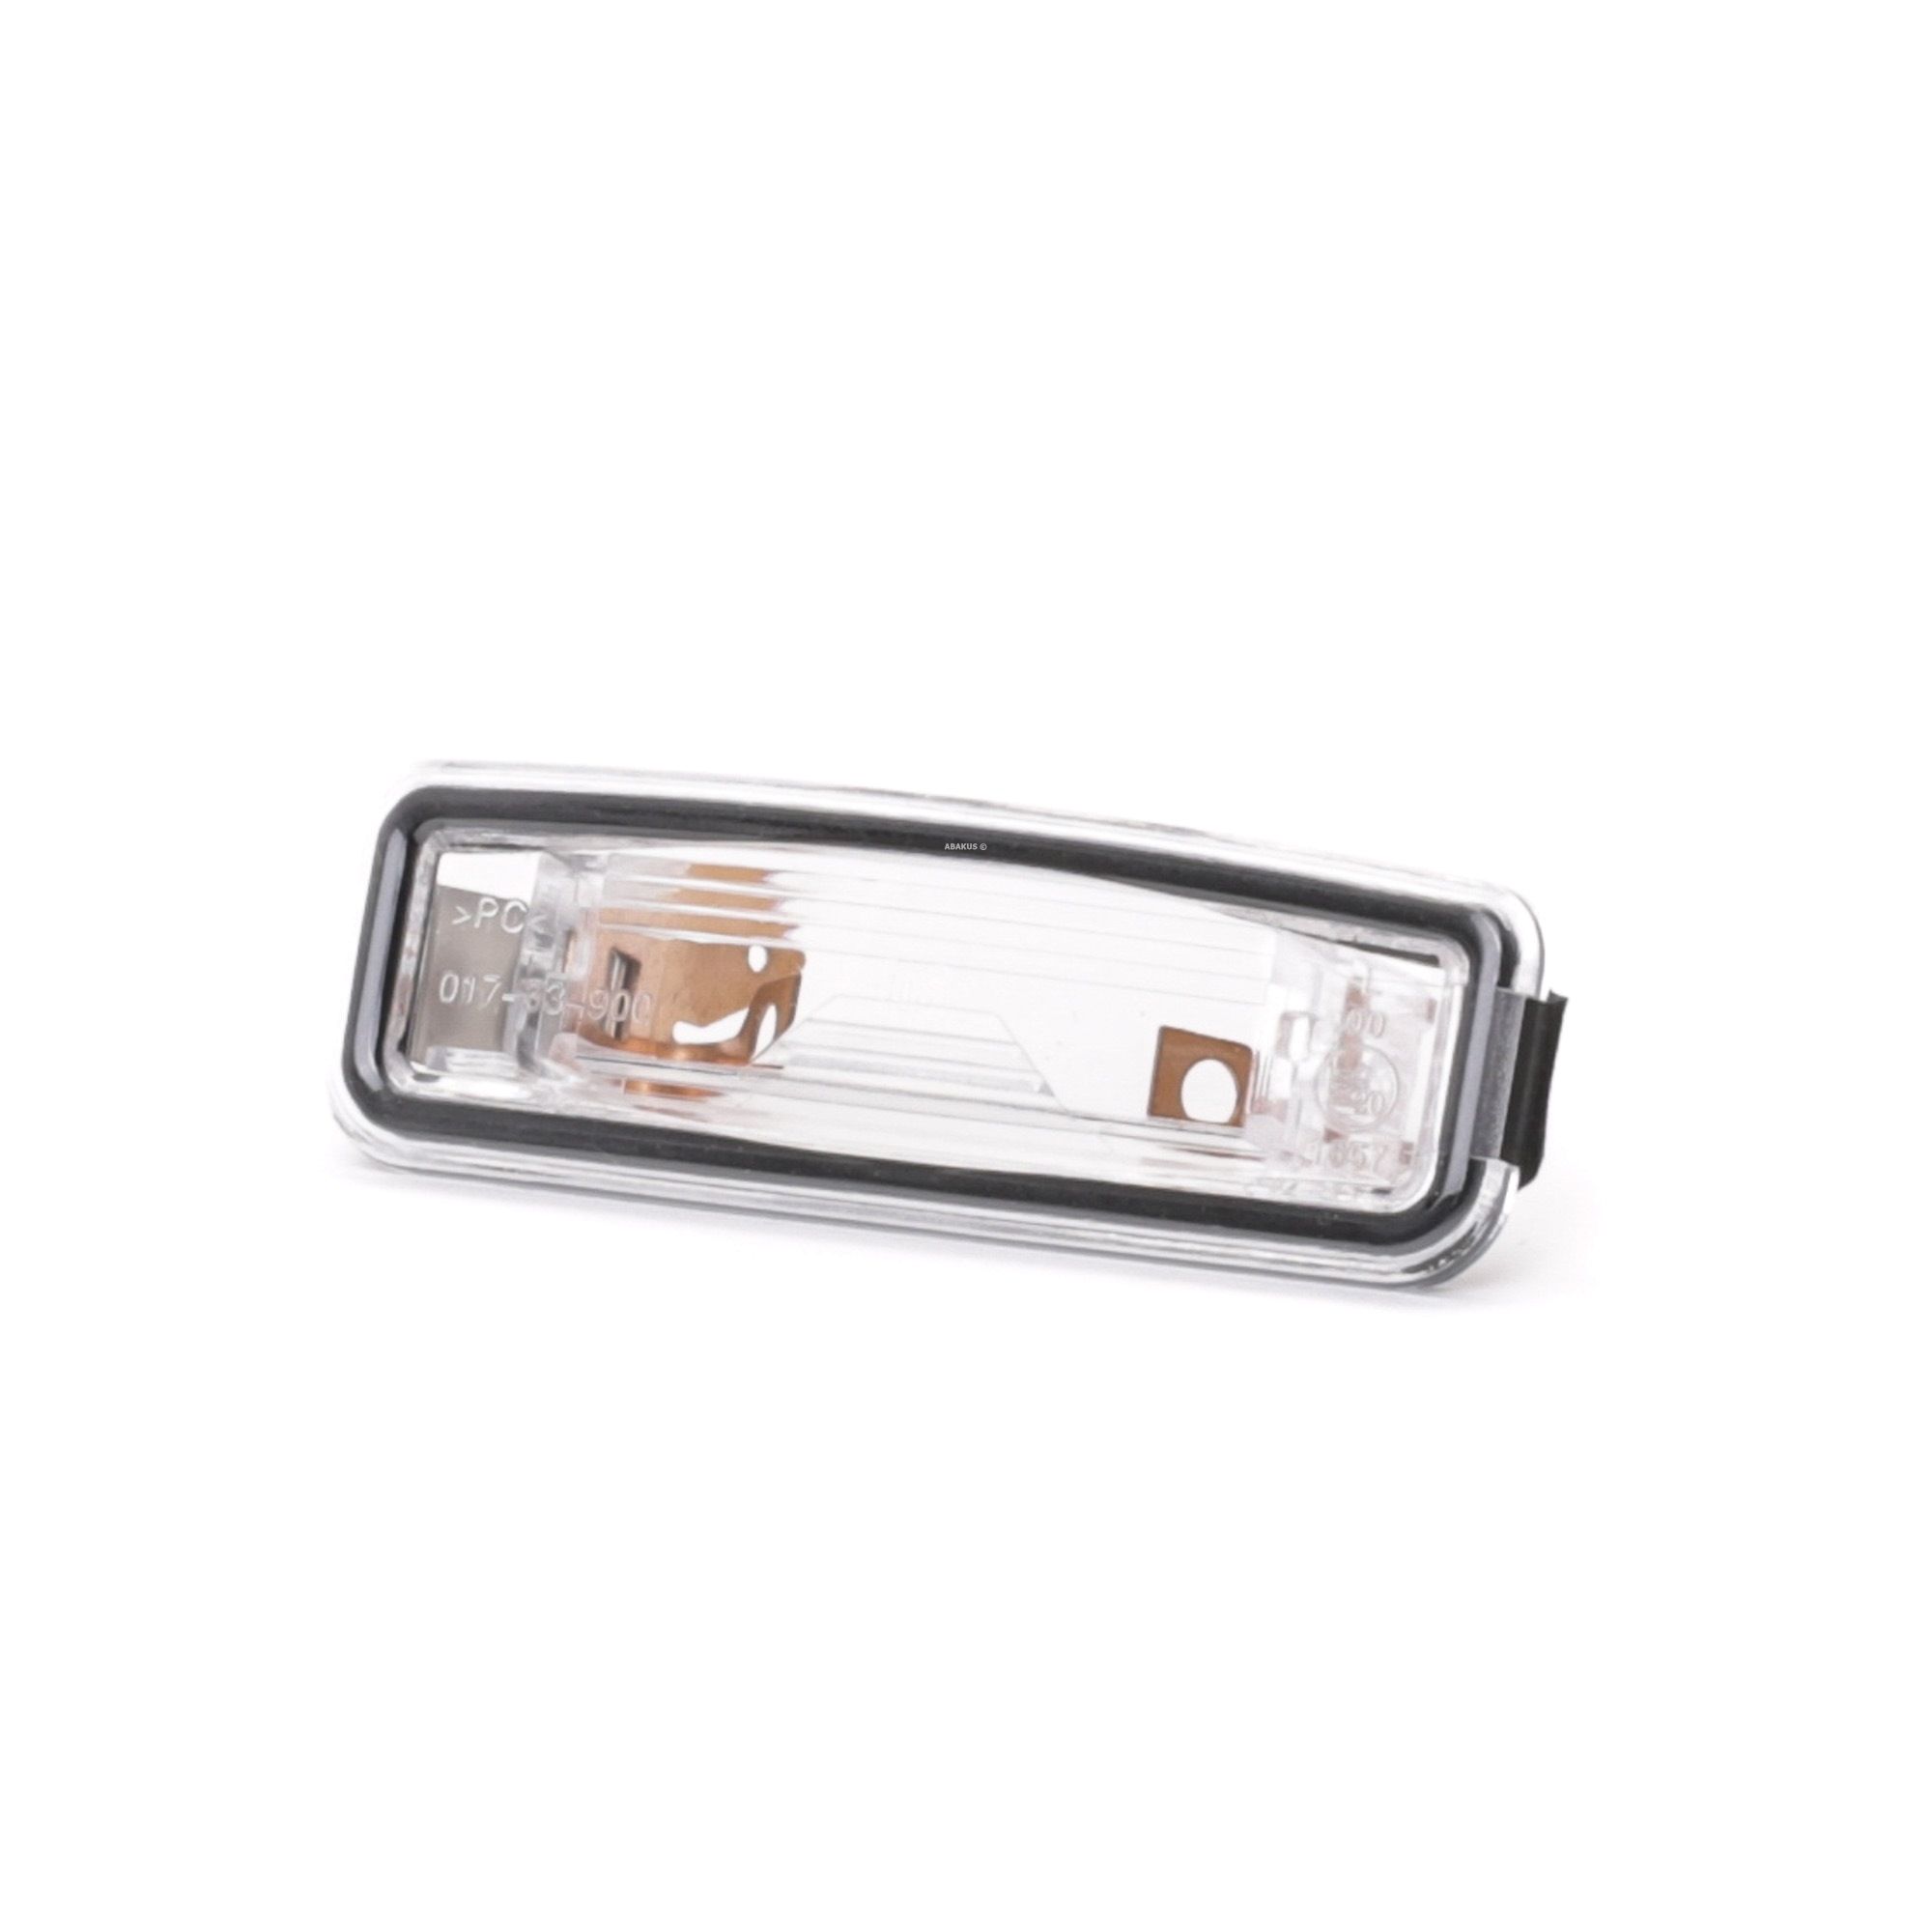 Ford FOCUS Licence Plate Light ABAKUS 017-33-900 cheap